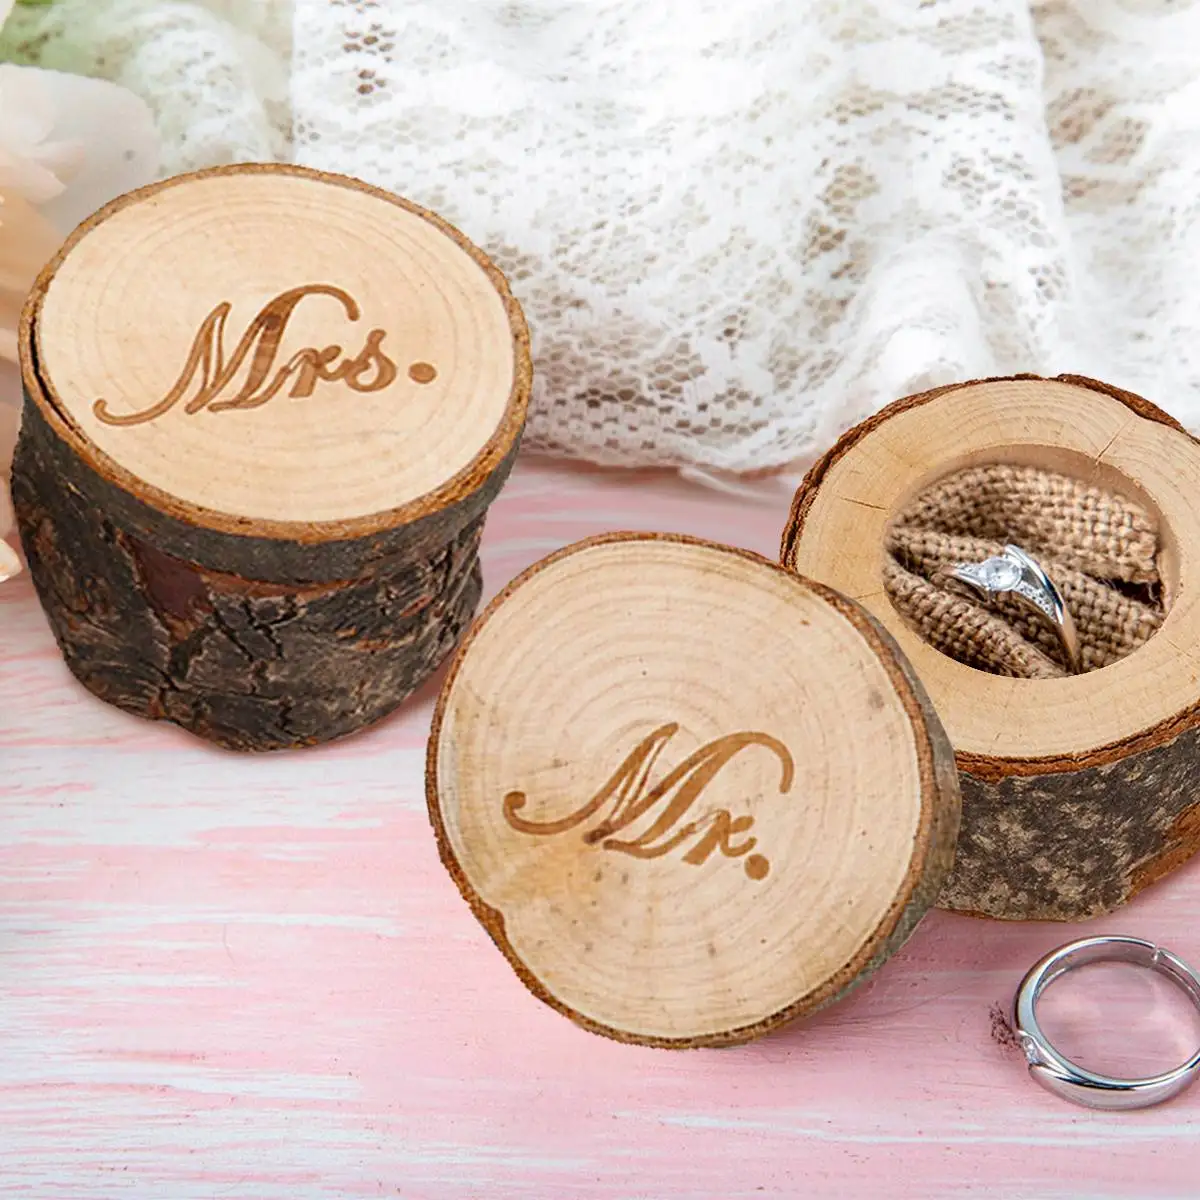 Rustic Country Wedding Wood Ring Bearer Box Jewelry Ring Box We Do Personalized Ring Holder Engagement Marriage Wedding Decor